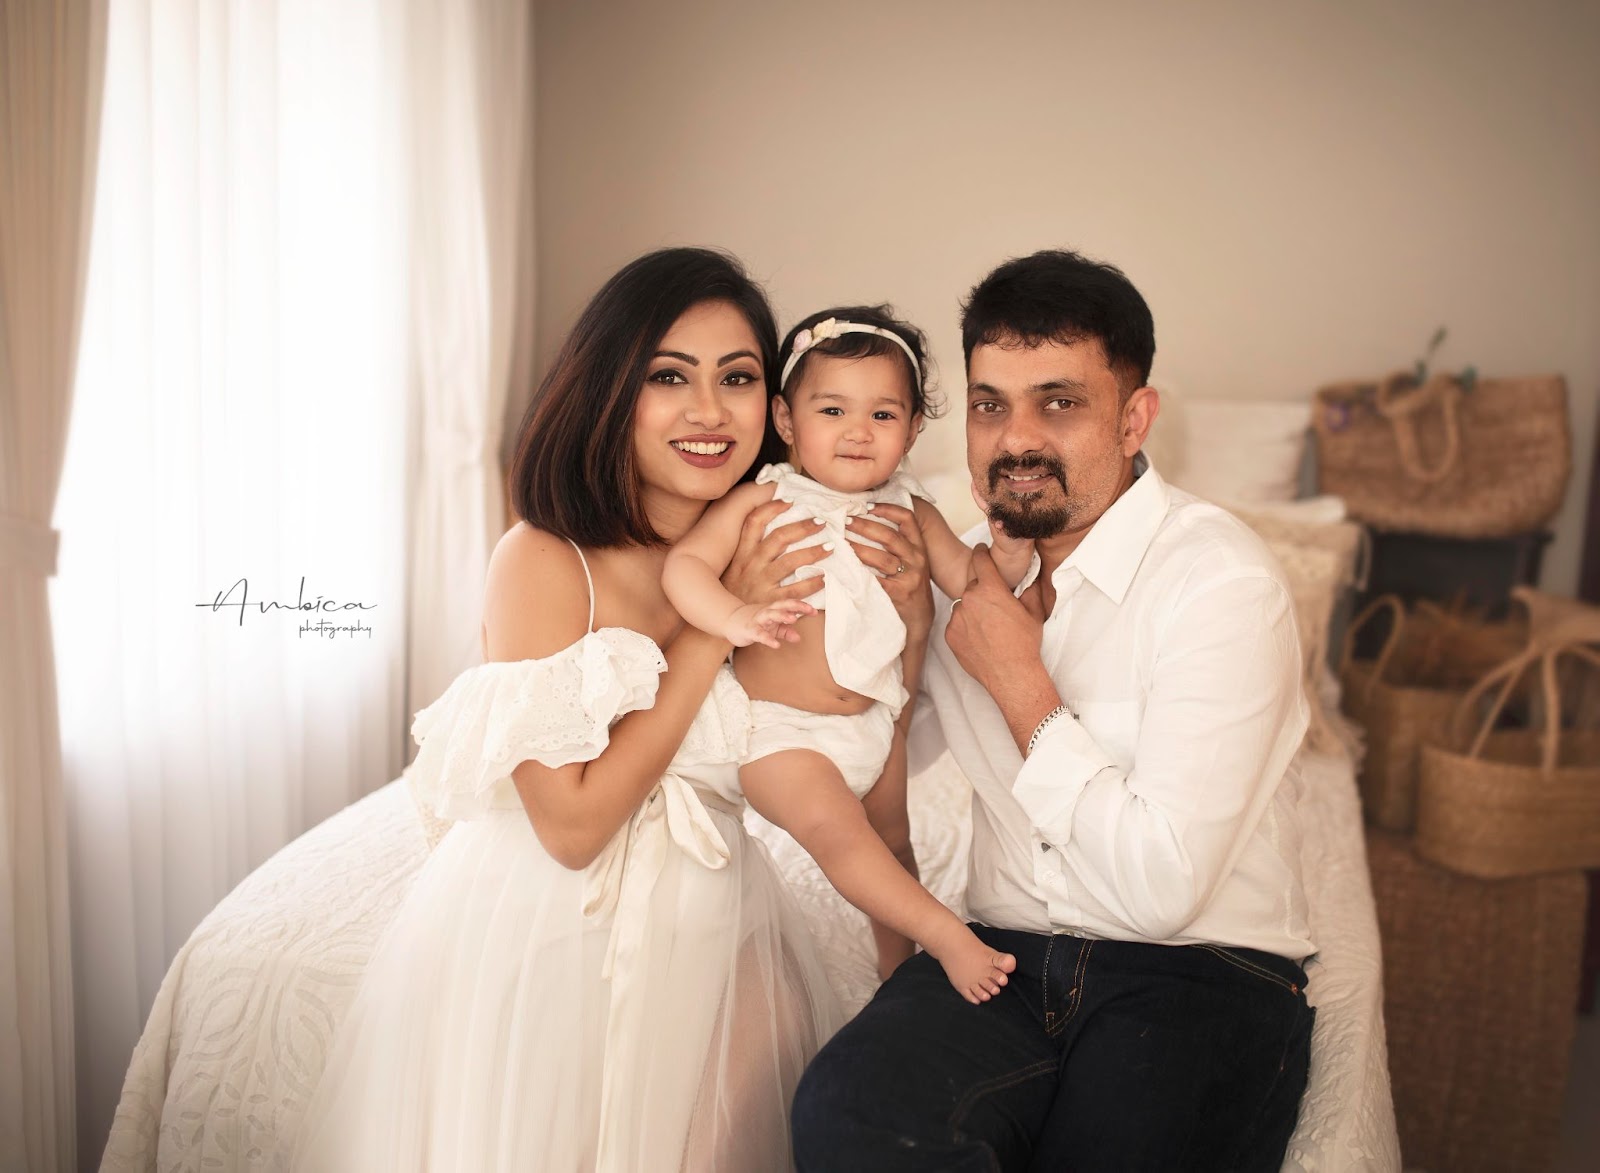 Ambica Photography is a remarkable photographer Bangalore. We specialize in maternity, baby, newborn photography, sitter, mommy photoshoot, & Family portraits